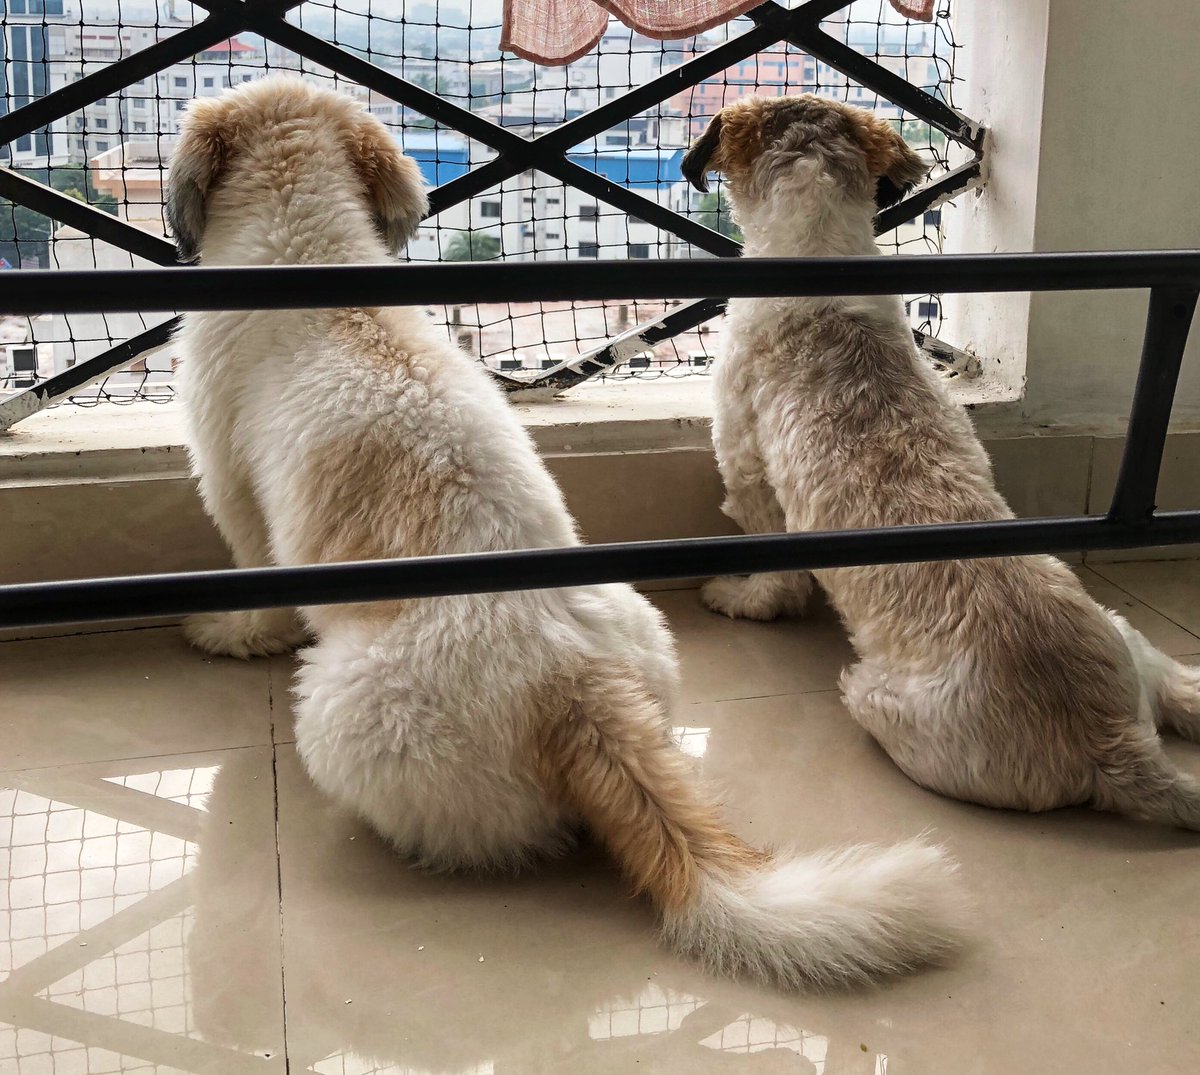 These two enjoying the view on a rainy #Chennai morning! And Luna is one year old! ❤️❤️ #shihtzu #shihtzusofinstagram #dogsofchennai #shihtzusofchennai #happybirthday #oneyearold